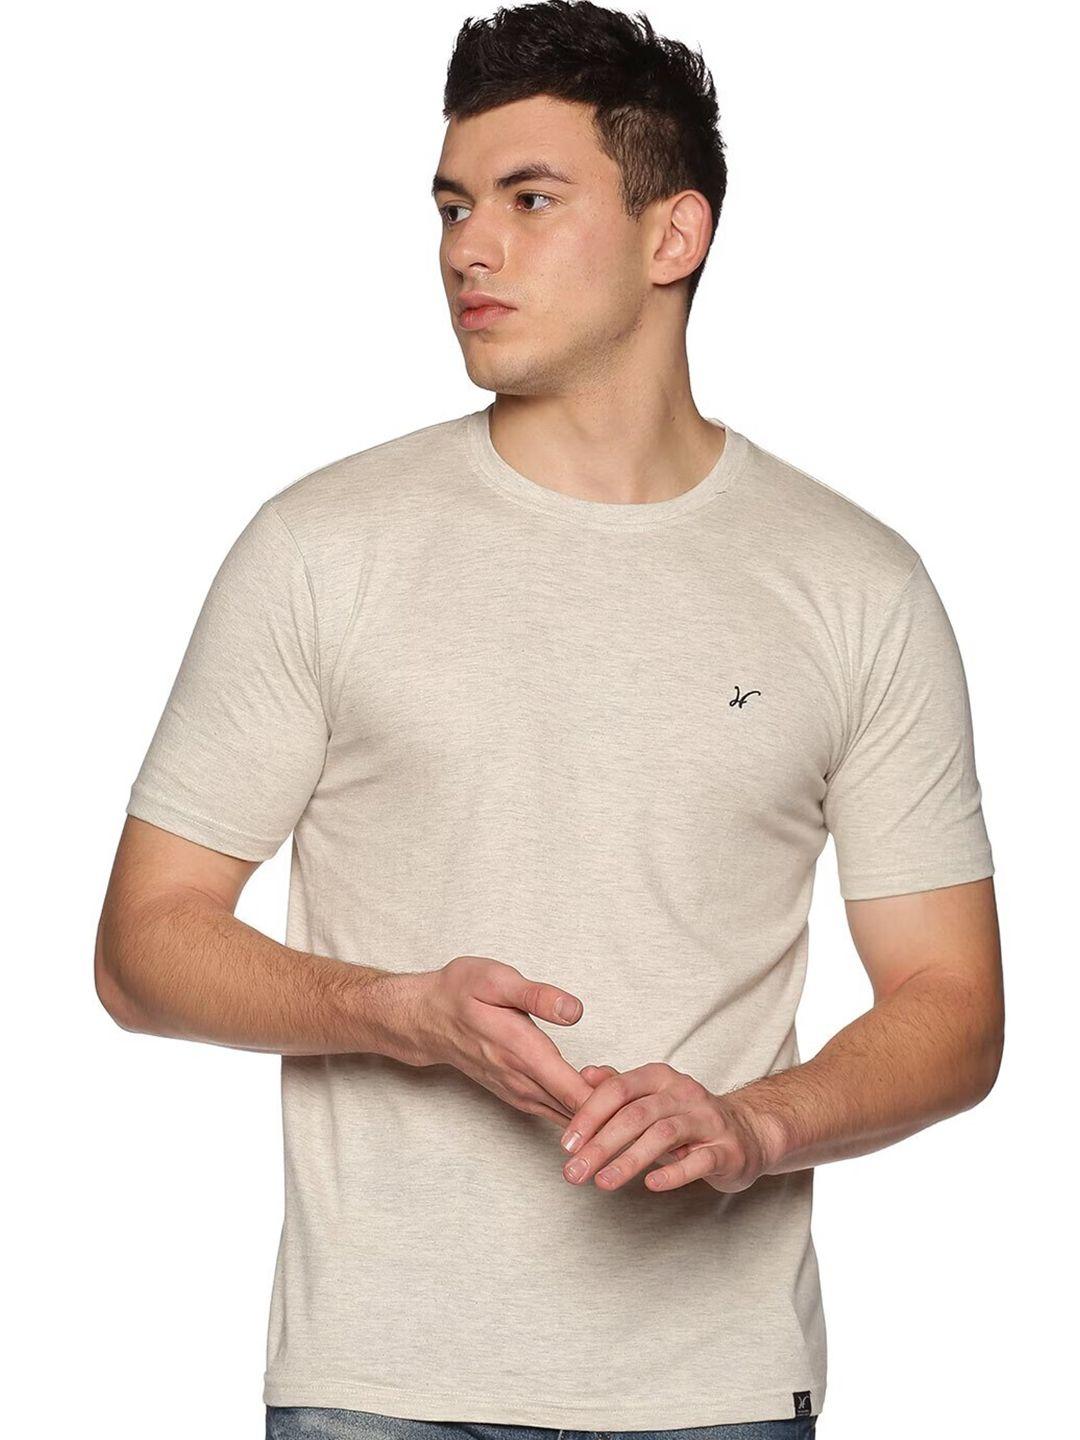 the-hollander-casual-pure-cotton-t-shirt